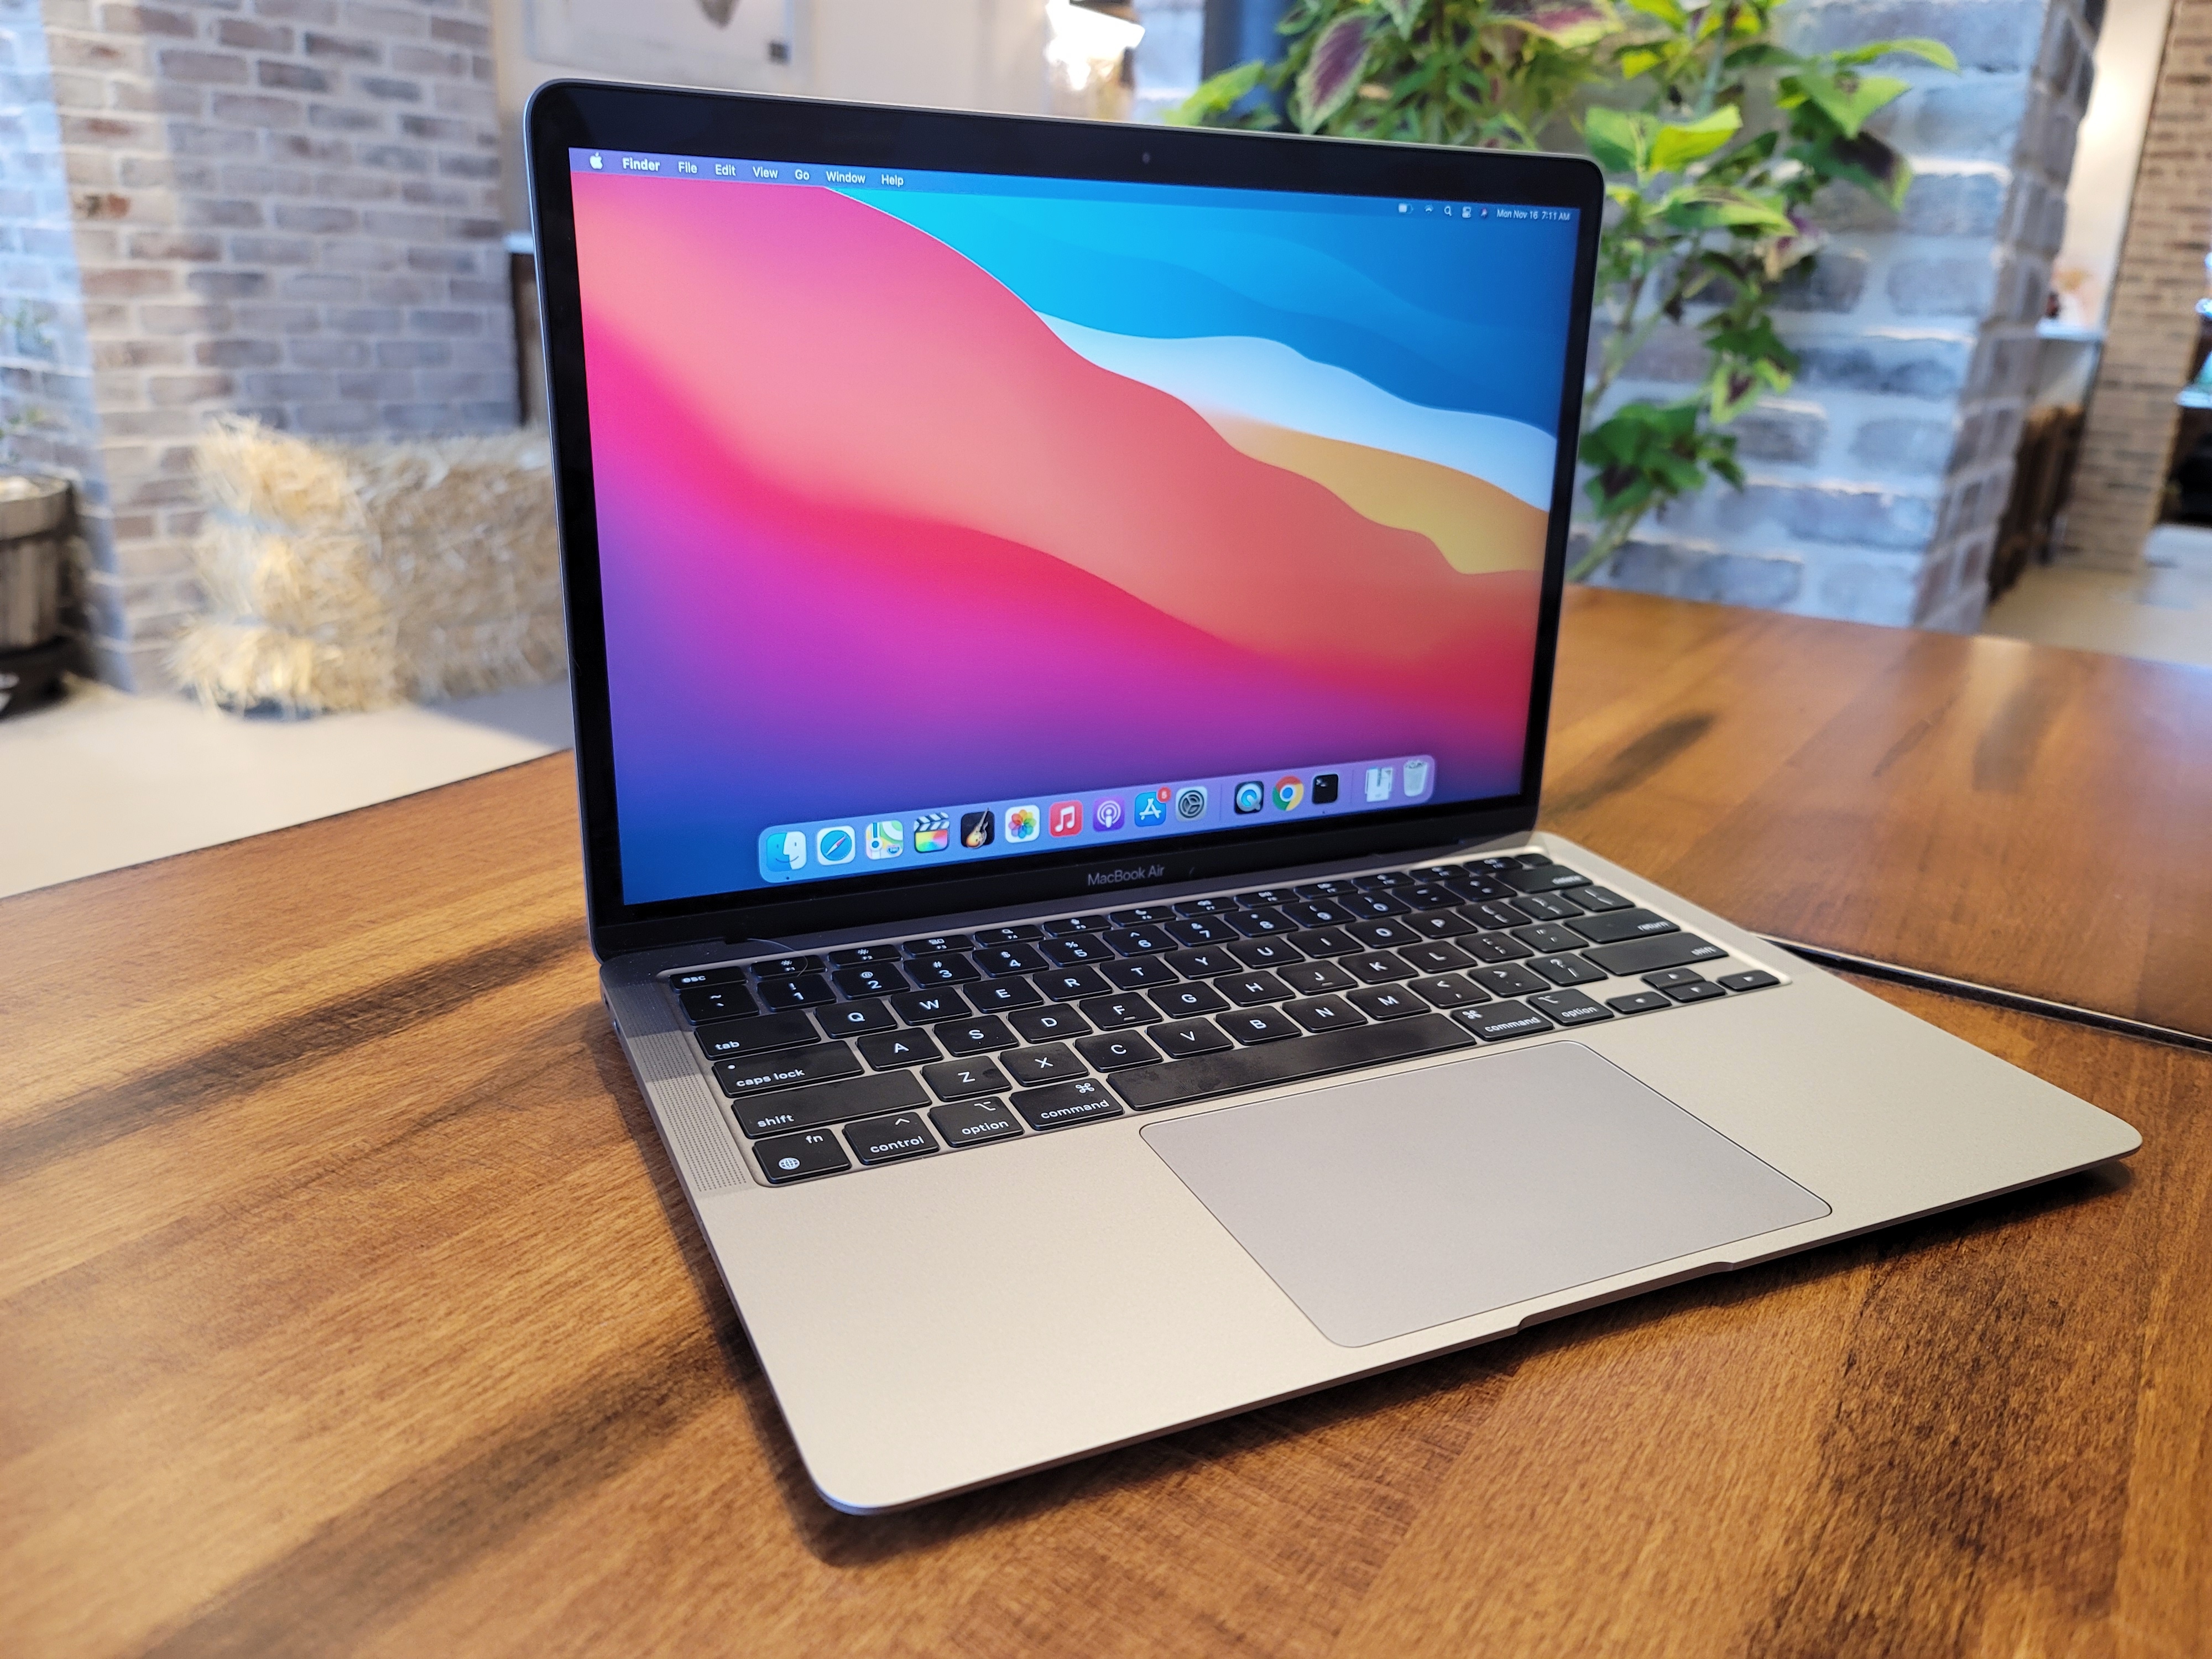 MacBook Air M1 review: The right Apple Silicon Mac for most